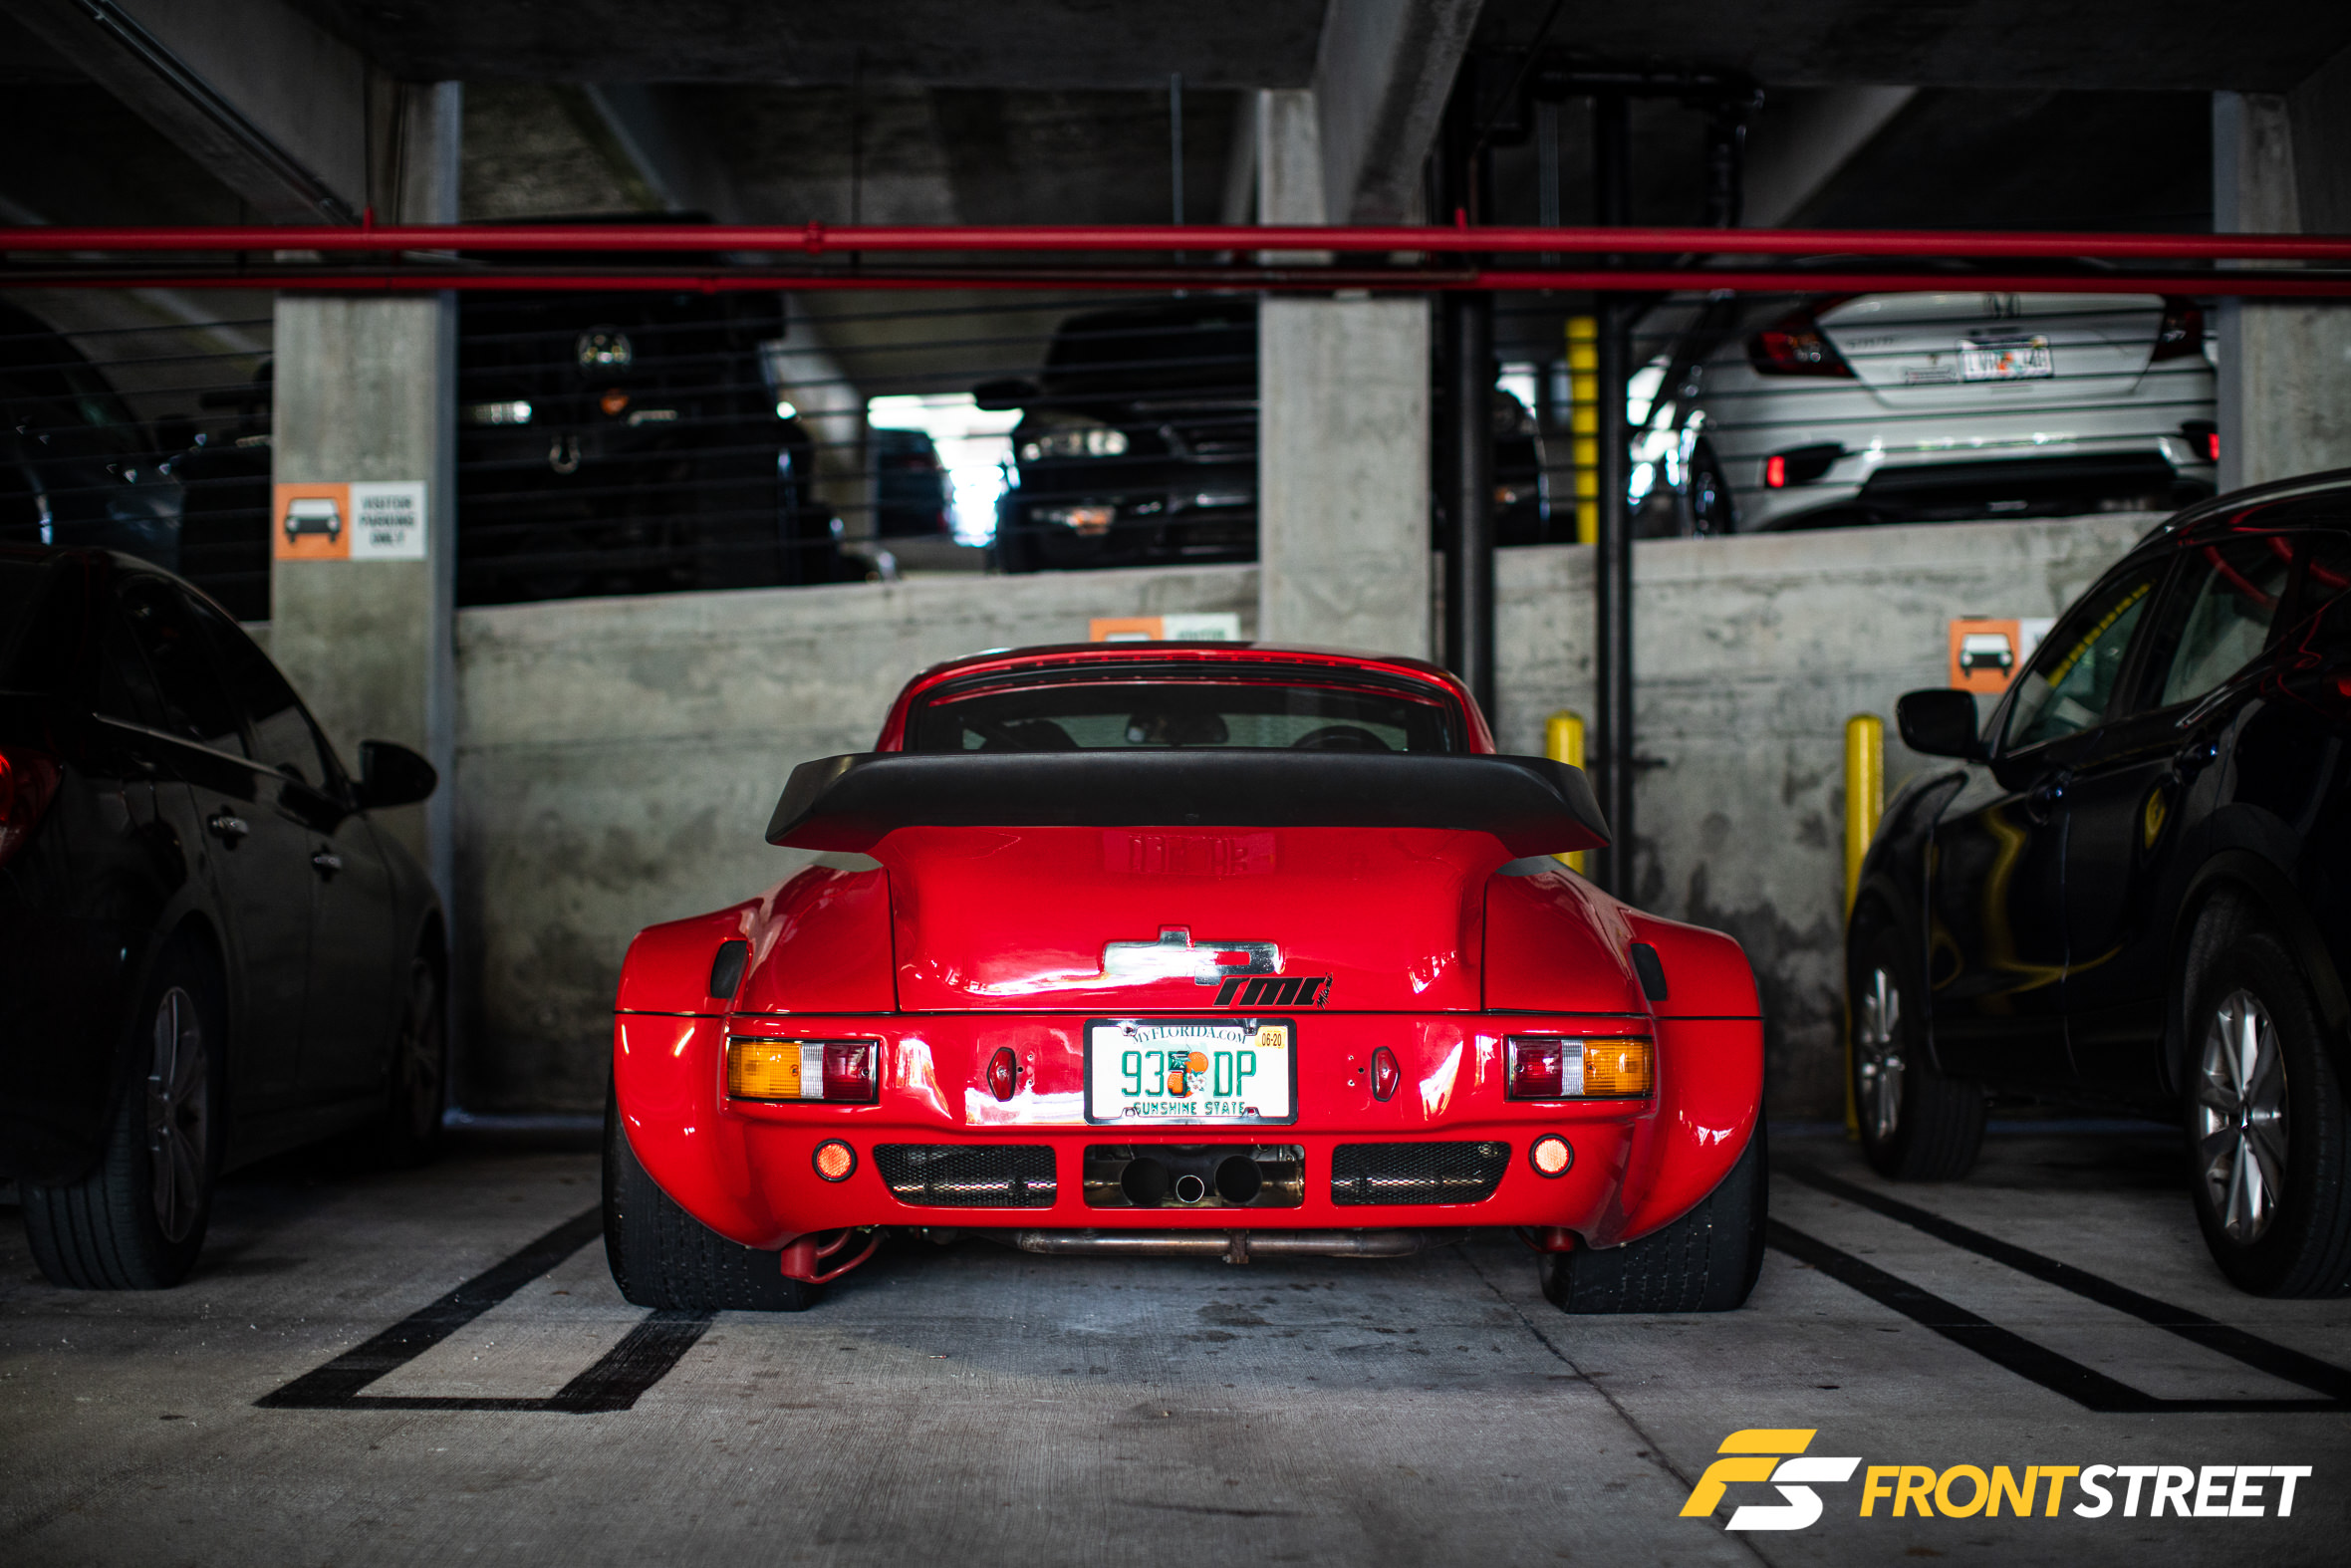 Retired In Miami: Stretching Out A 1989 Porsche DP 935 Long Windshield